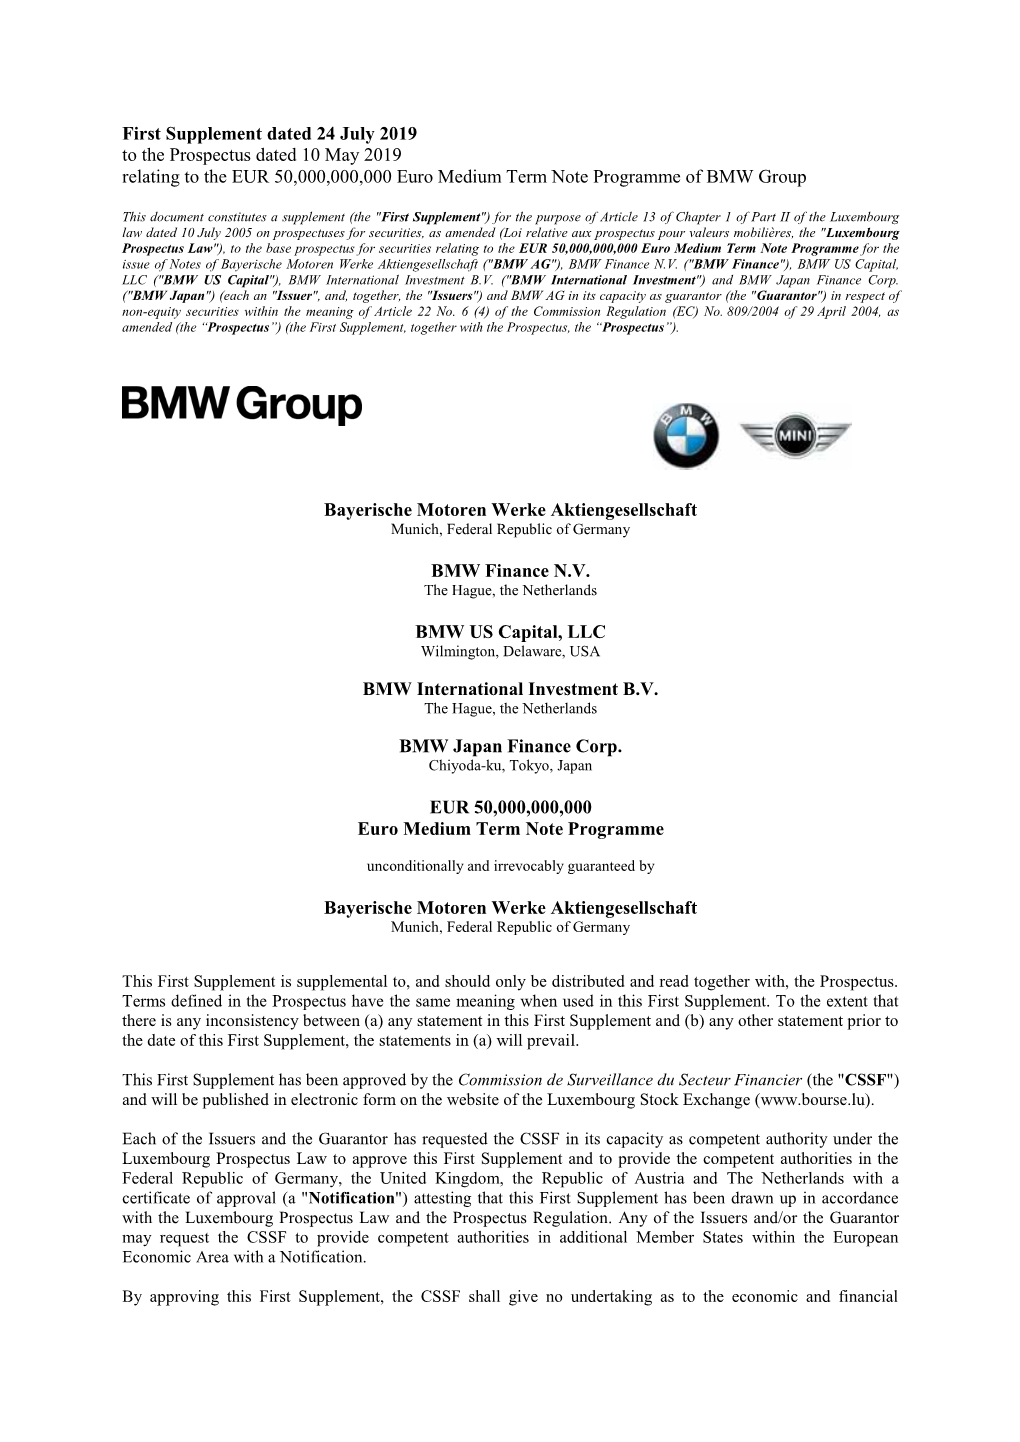 First Supplement Dated 24 July 2019 to the Prospectus Dated 10 May 2019 Relating to the EUR 50,000,000,000 Euro Medium Term Note Programme of BMW Group